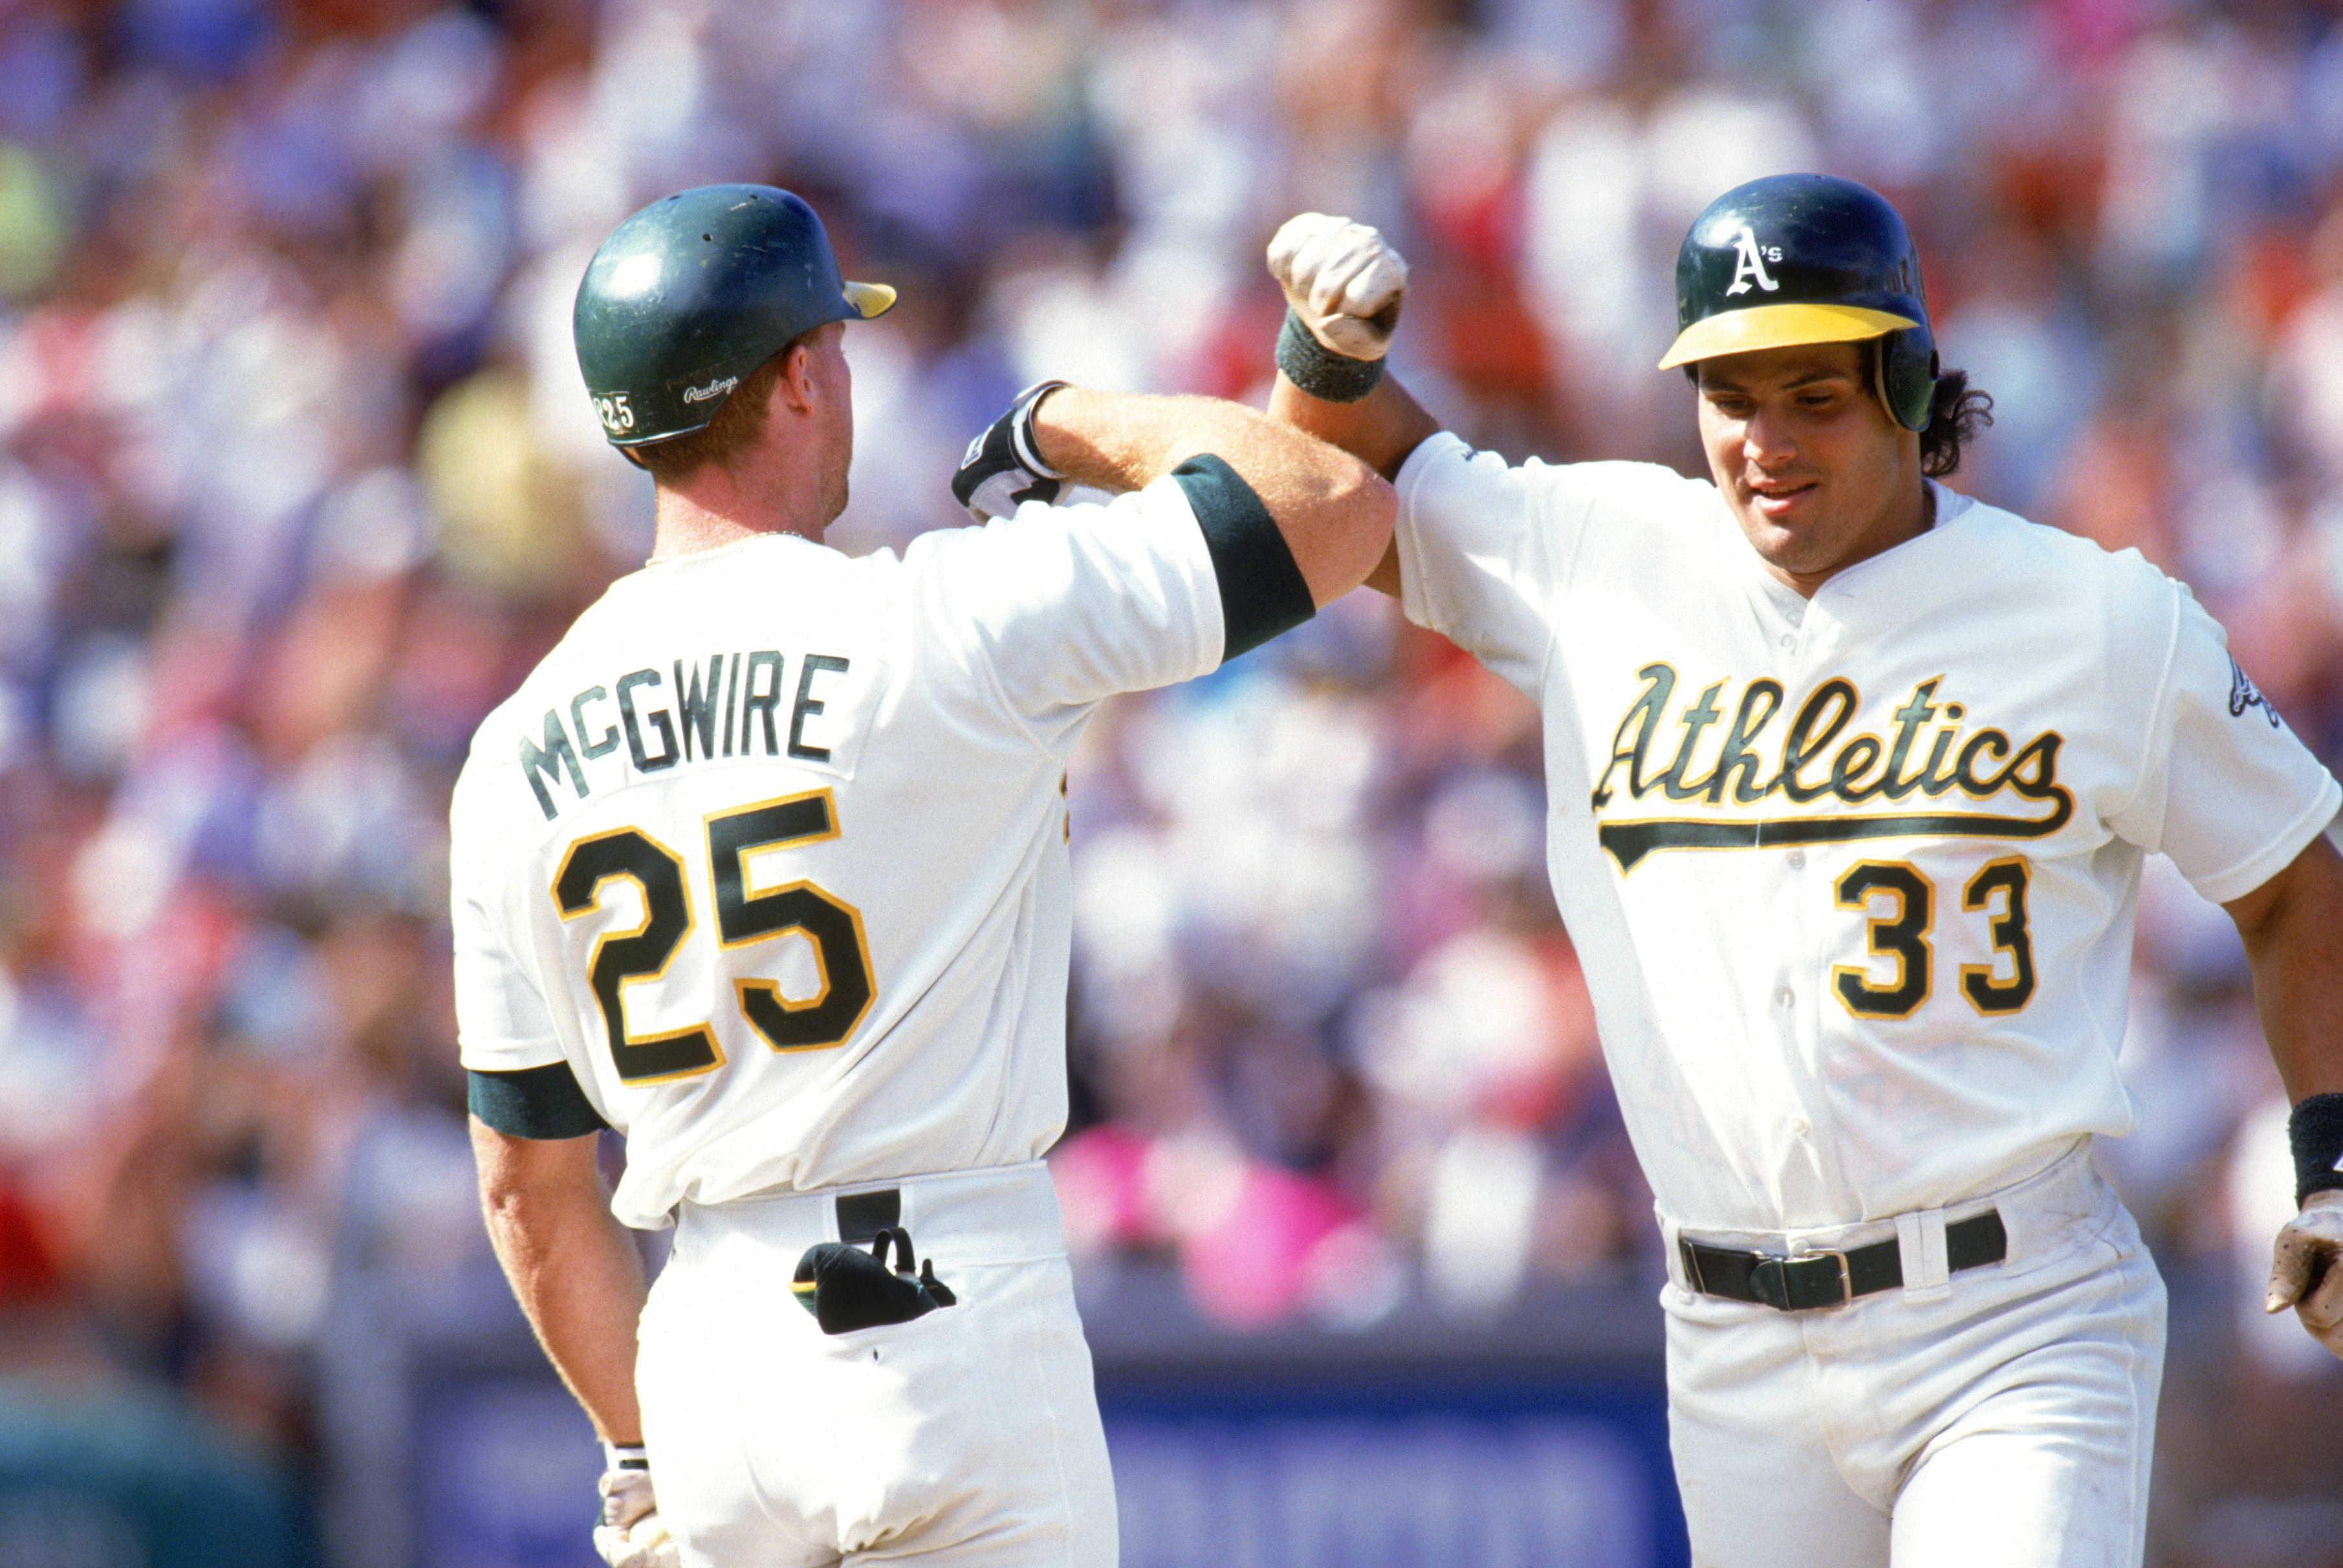 Mark McGwire among 5 to enter A's Hall of Fame